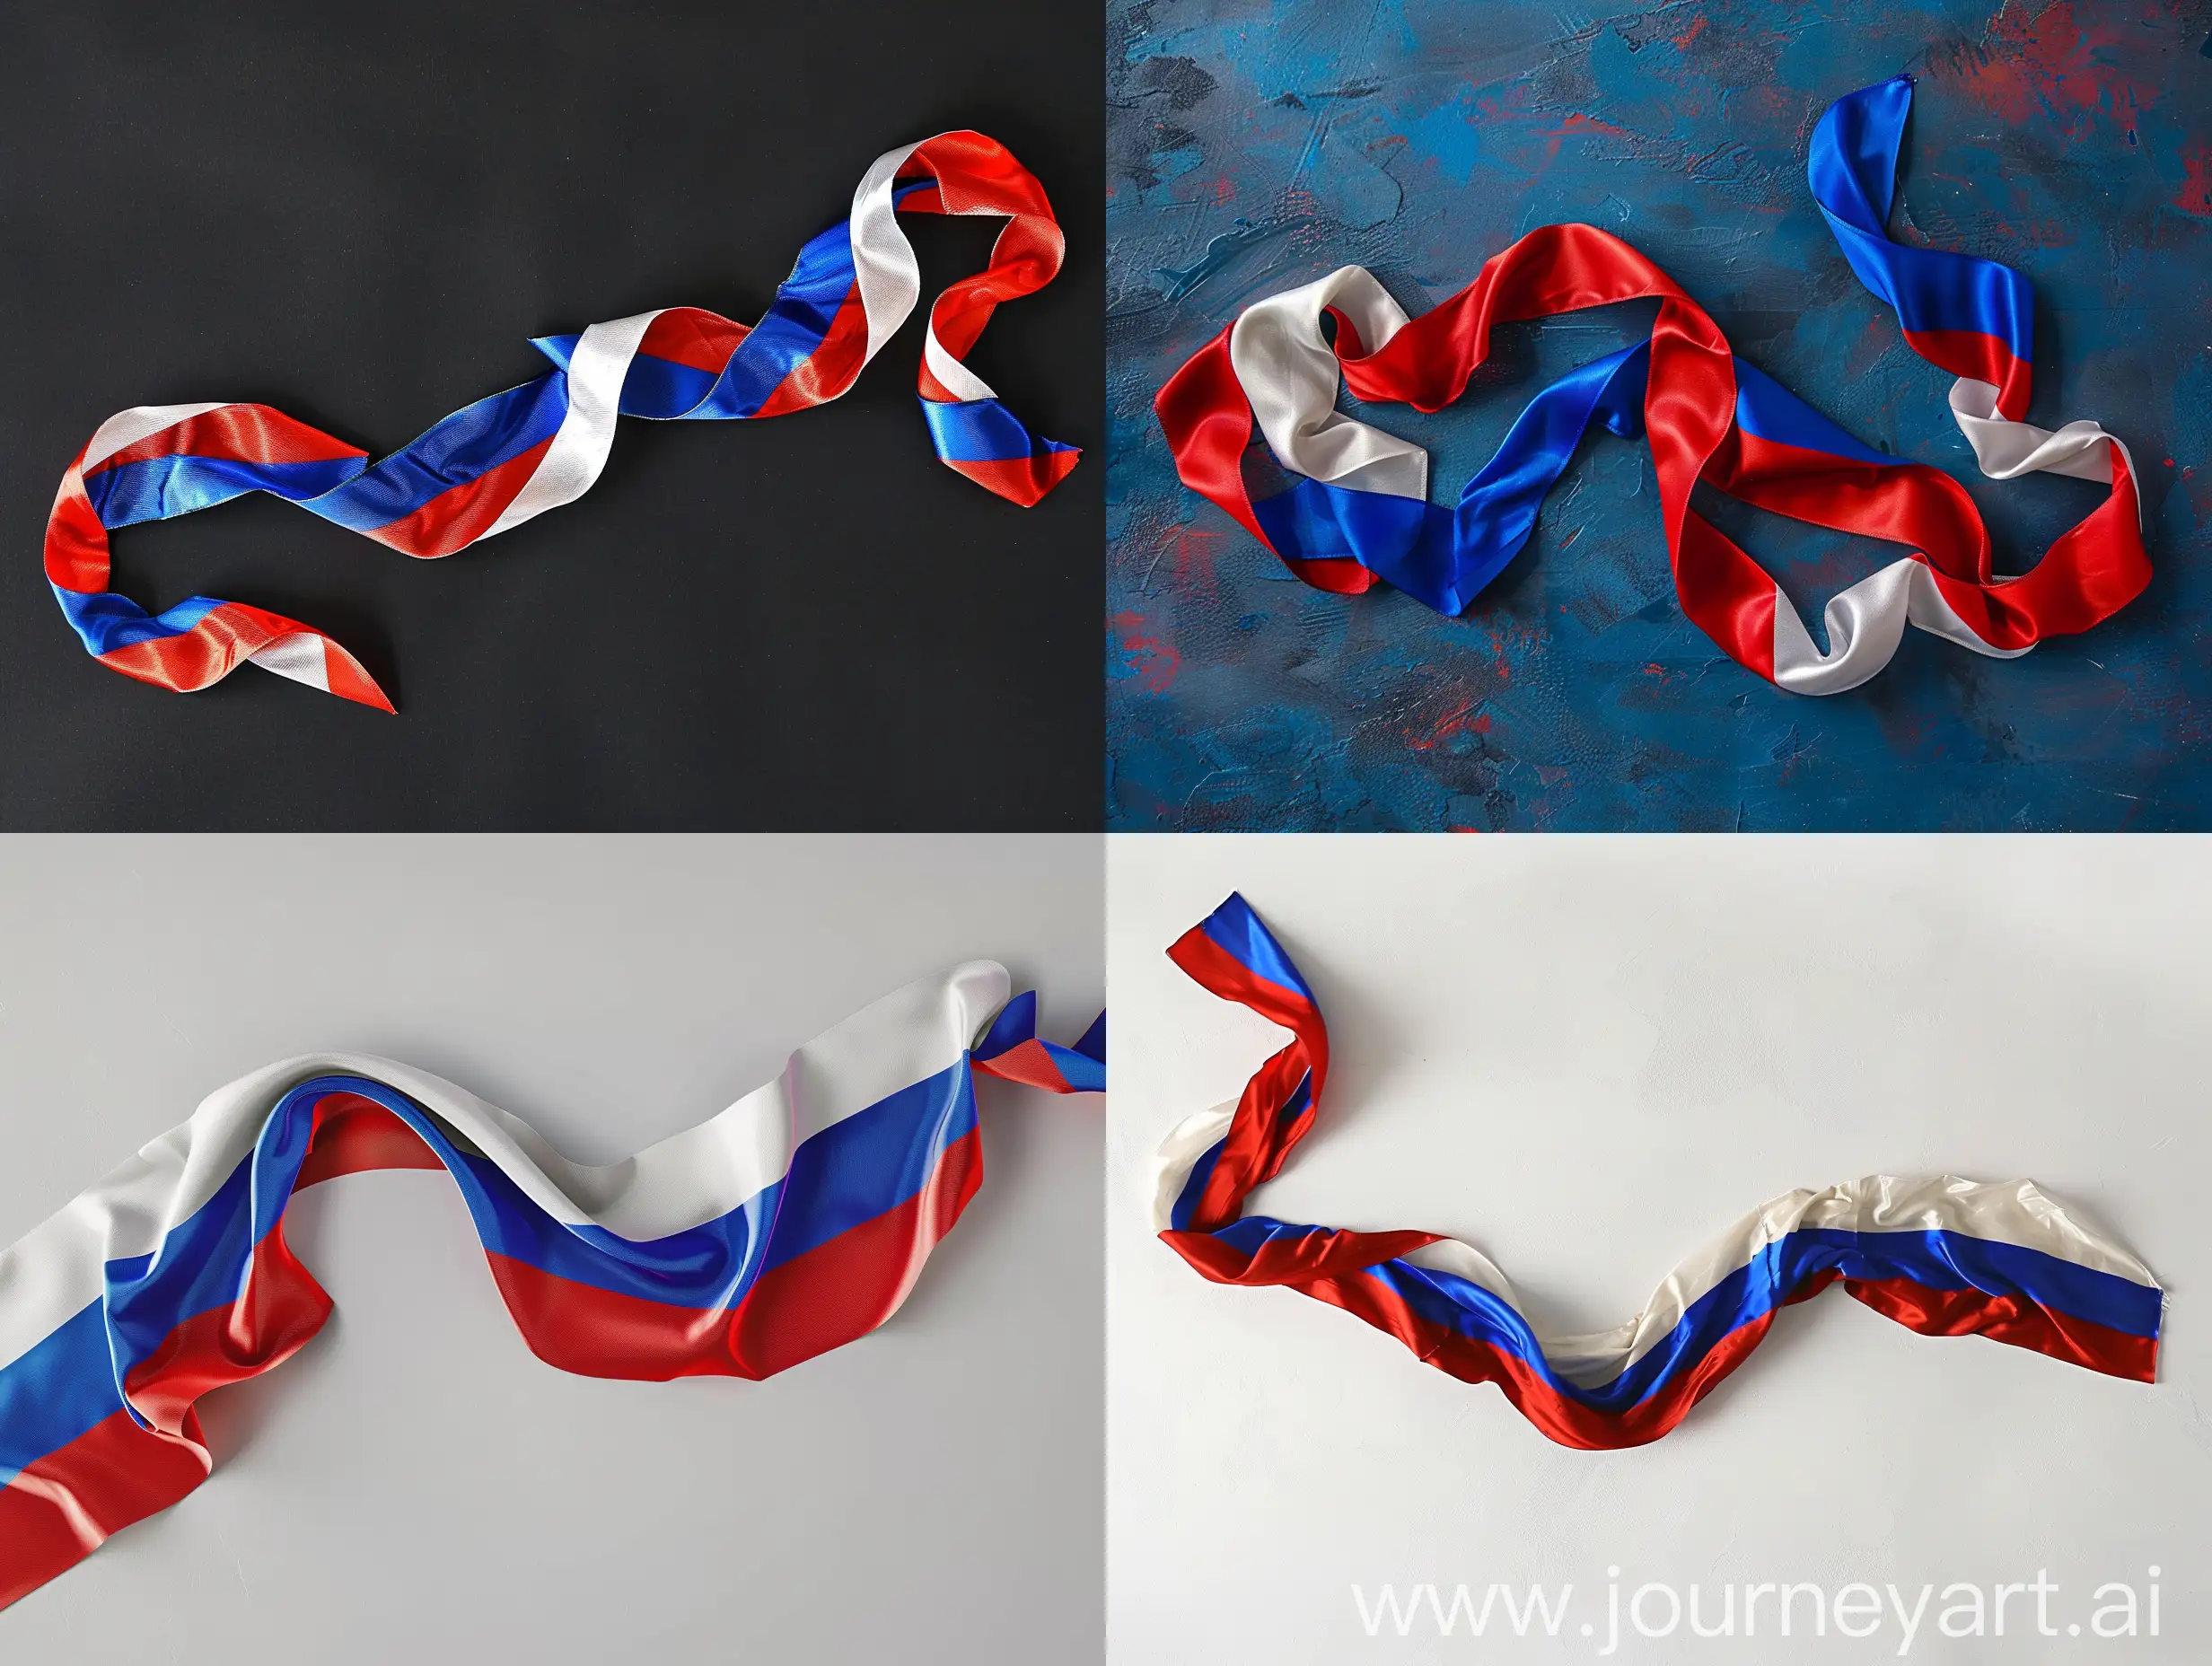 THE FLOWING FLAG OF RUSSIA IN THE FORM OF A RIBBON